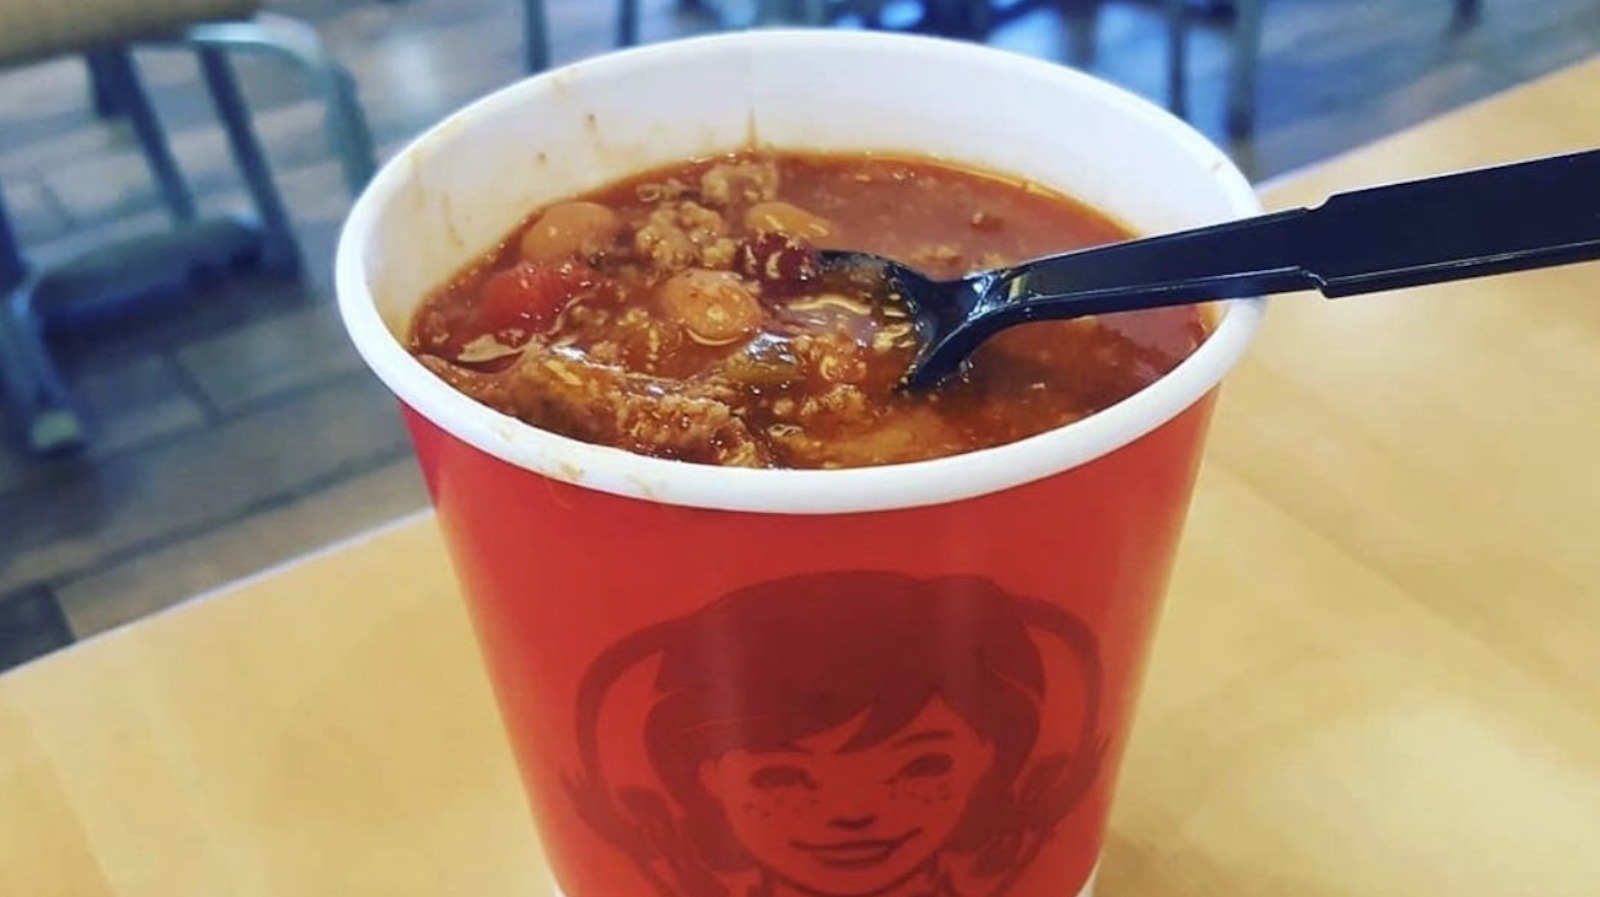 https://www.mashed.com/img/gallery/the-untold-truth-of-wendys-chili/l-intro-1629895871.jpg